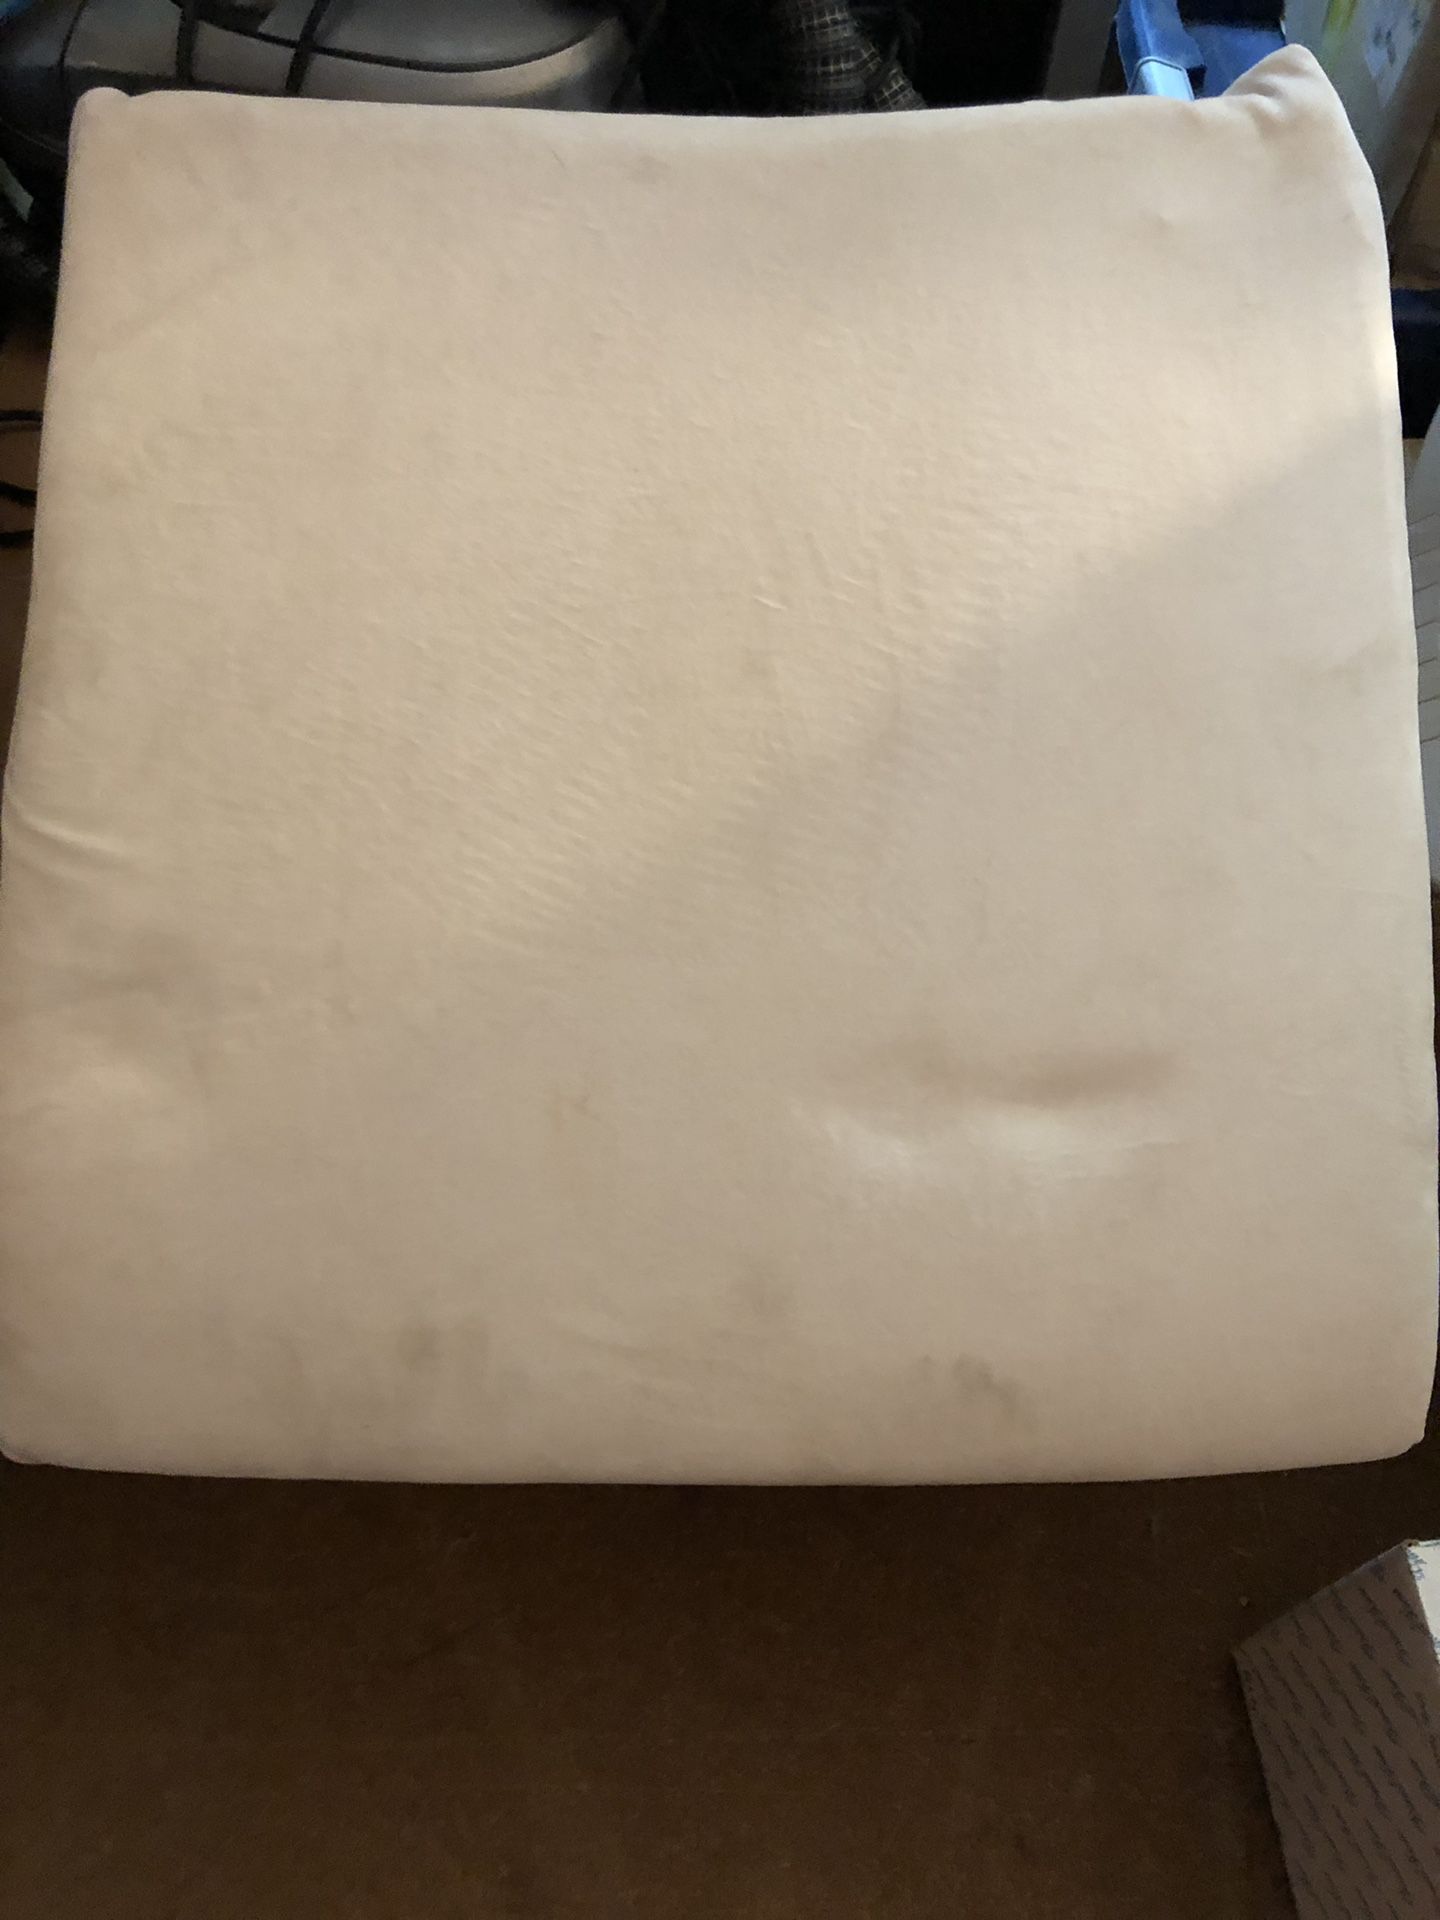 Barely Used Pillow Wedge SUPER SALE $6.00